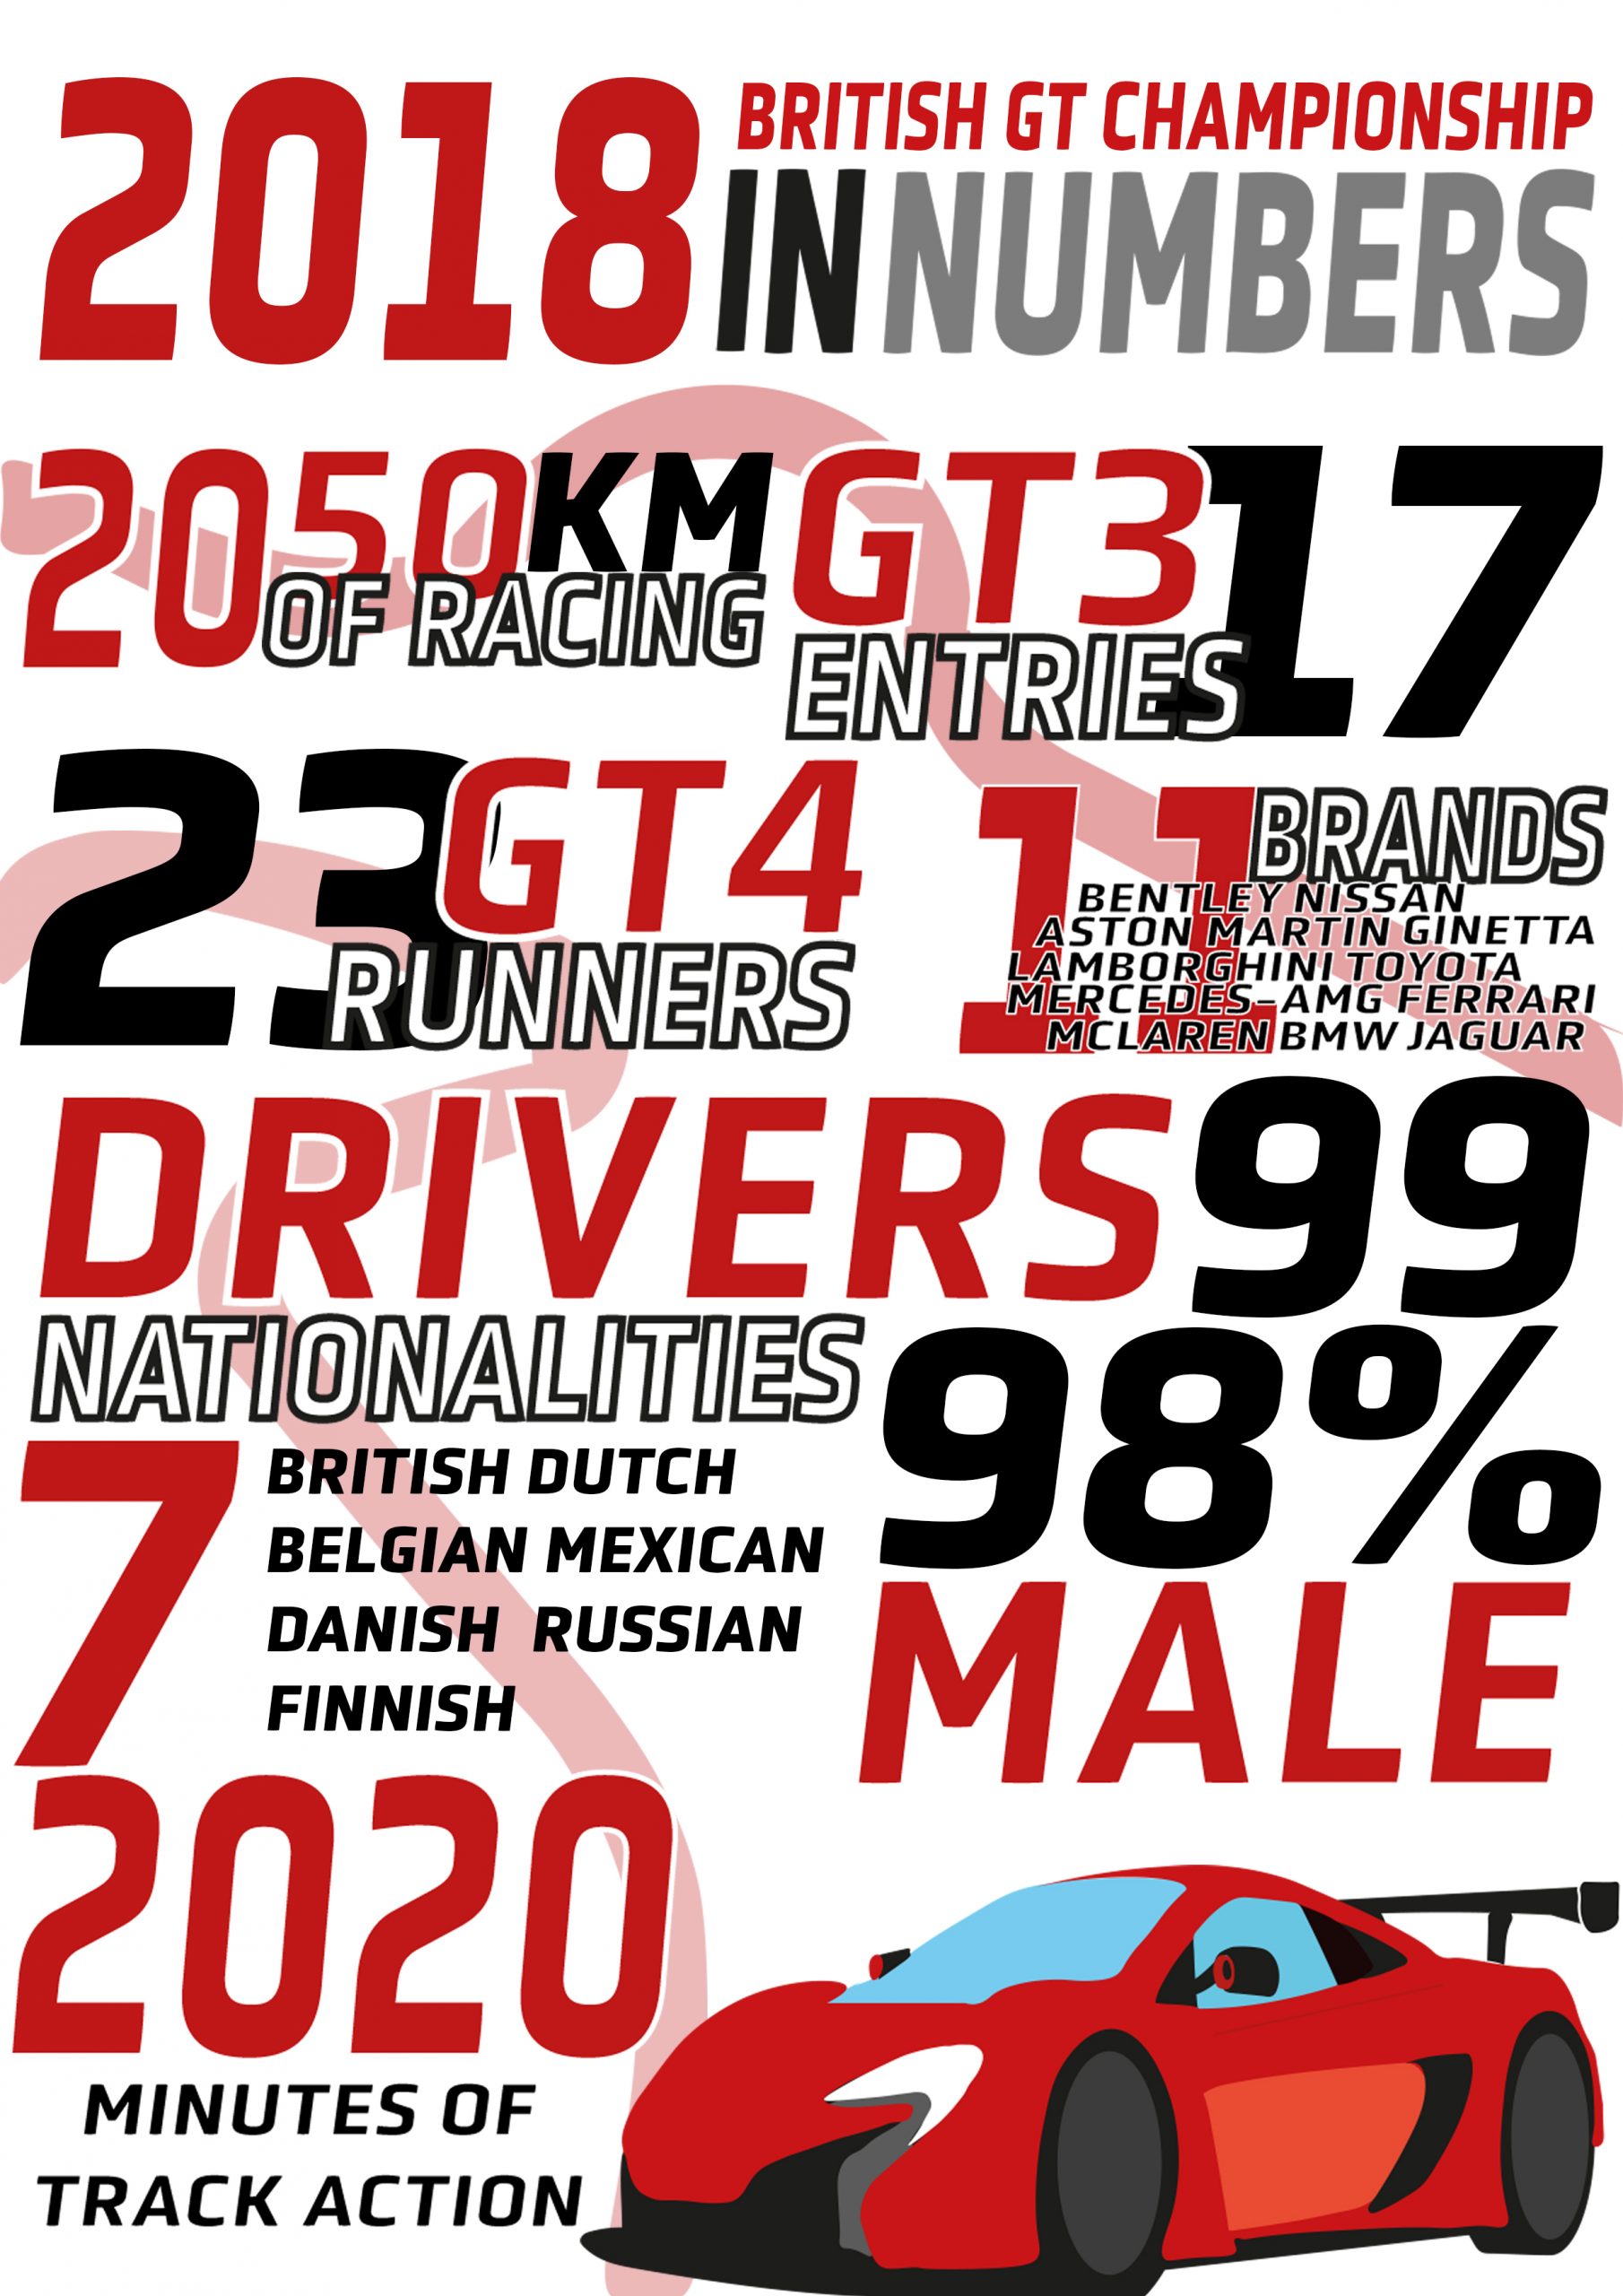 An infographic detailing the facts, figures and numbers of the 2018 British GT Championship Season to accompany The British GT Fans Show's recent full season review. Credit: Nick Smith/RacingPhotographic.co.uk